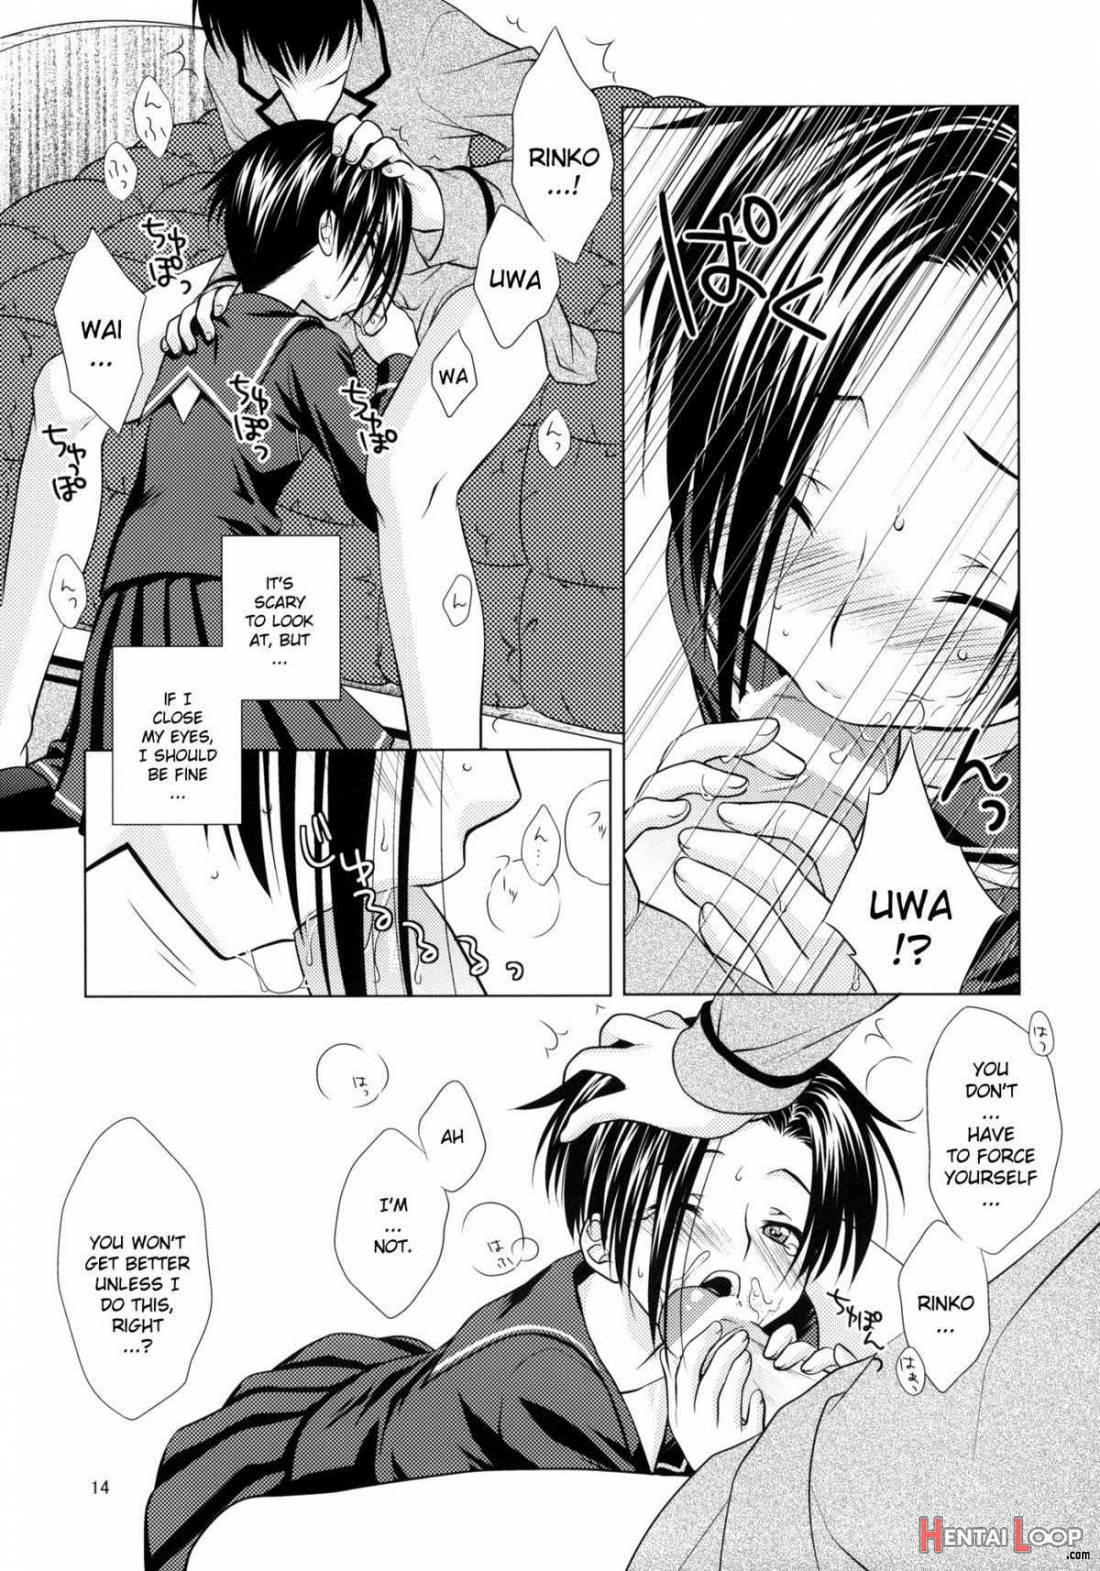 Love+h Rinko page 13